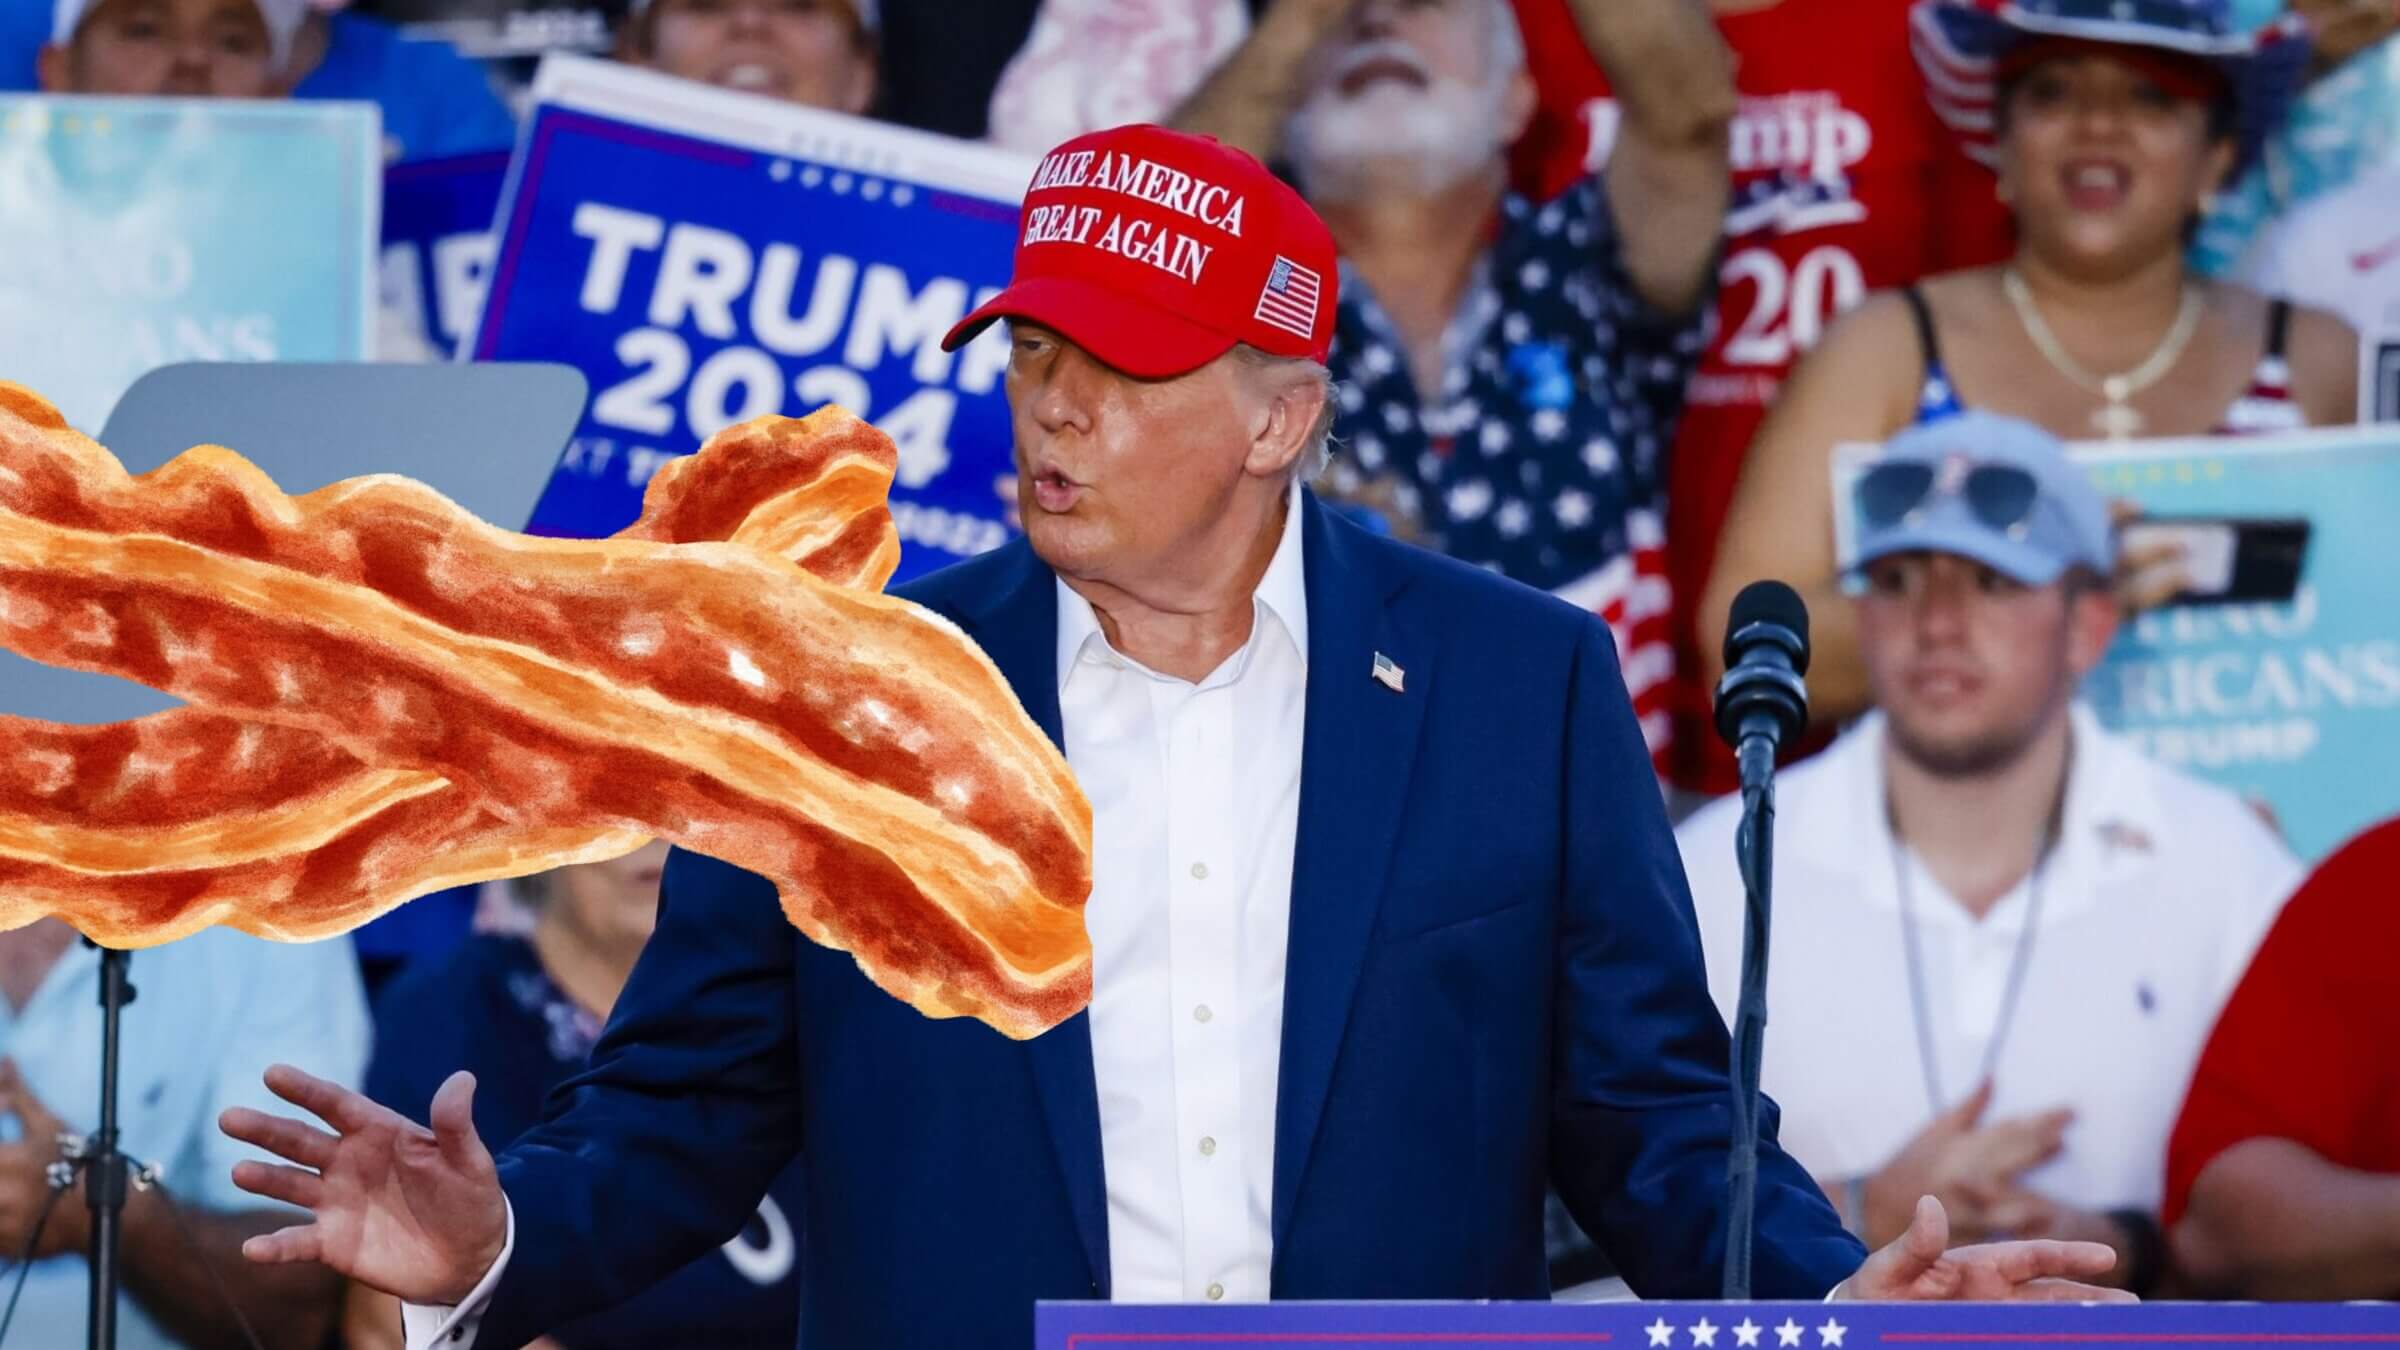 Donald Trump recently kvetched about how Americans no longer eat bacon.